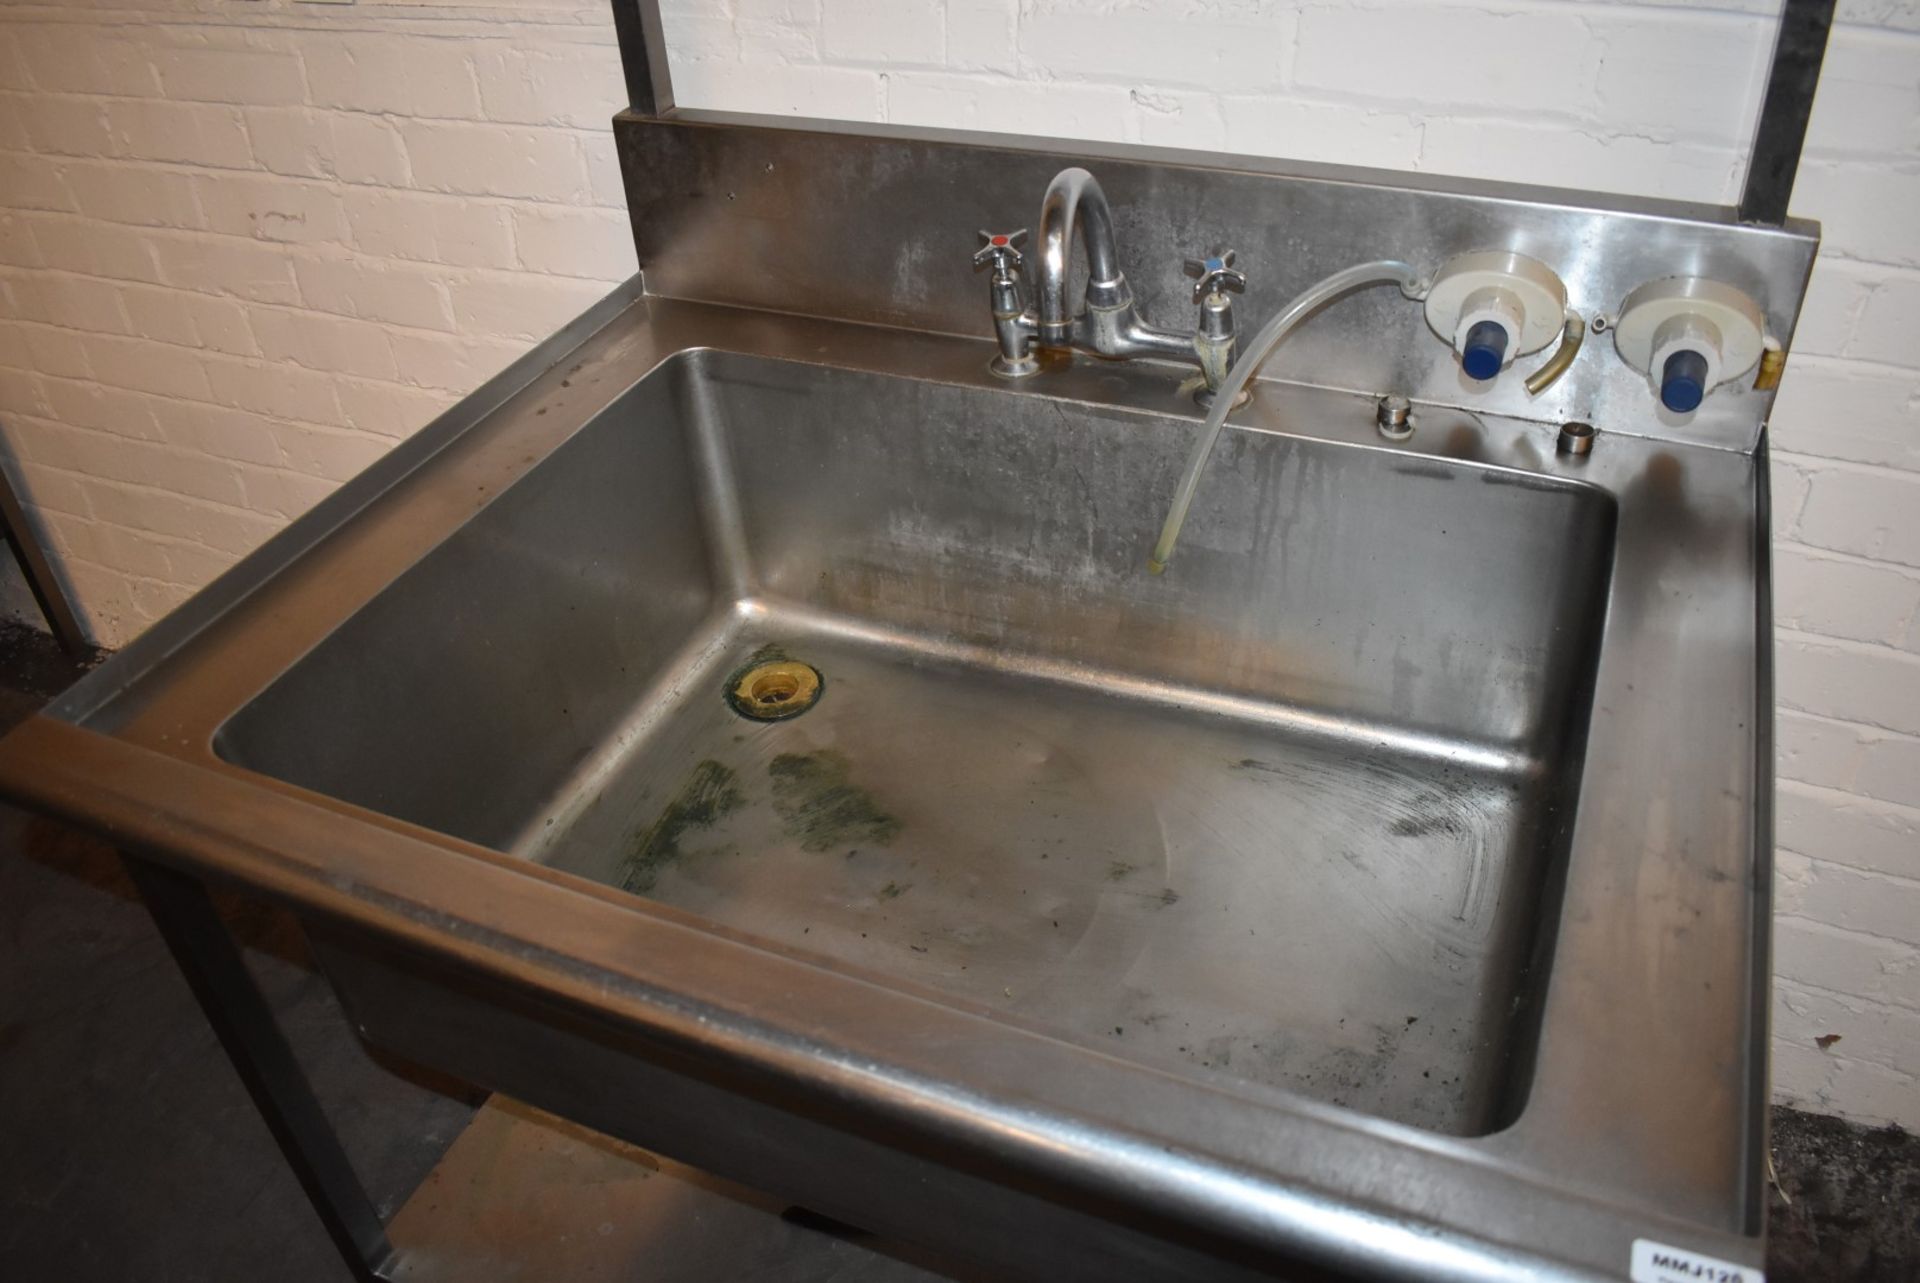 1 x Stainless Steel Sink Unit Featuring a Large 80x60cm Wash Bowl, Mixer Taps, Soap Dispensers, - Image 6 of 11